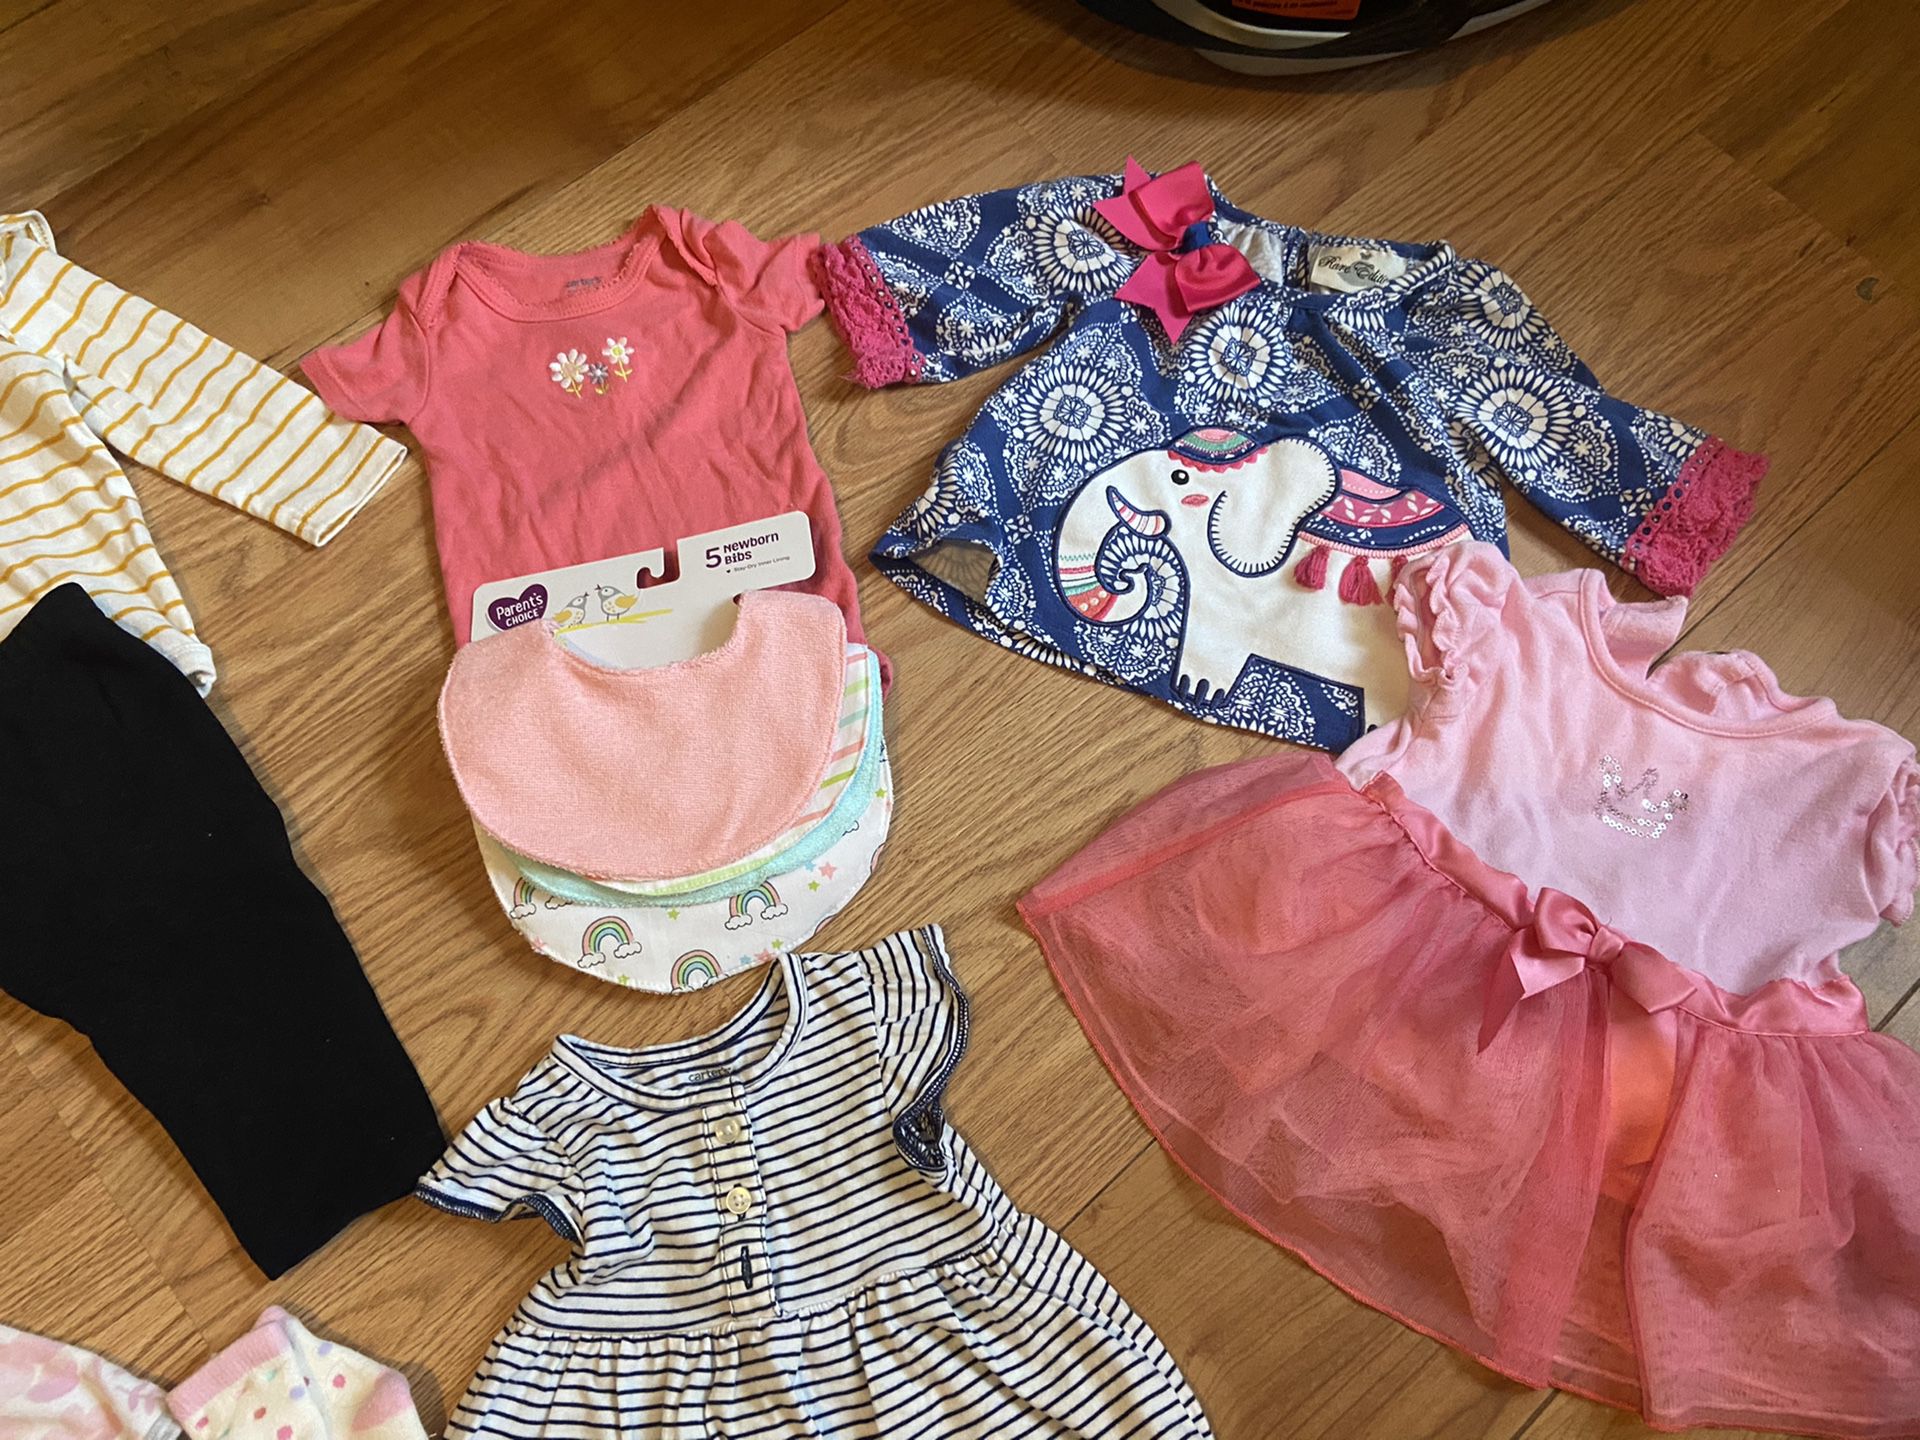 New and barely worn baby girl clothes/accessories